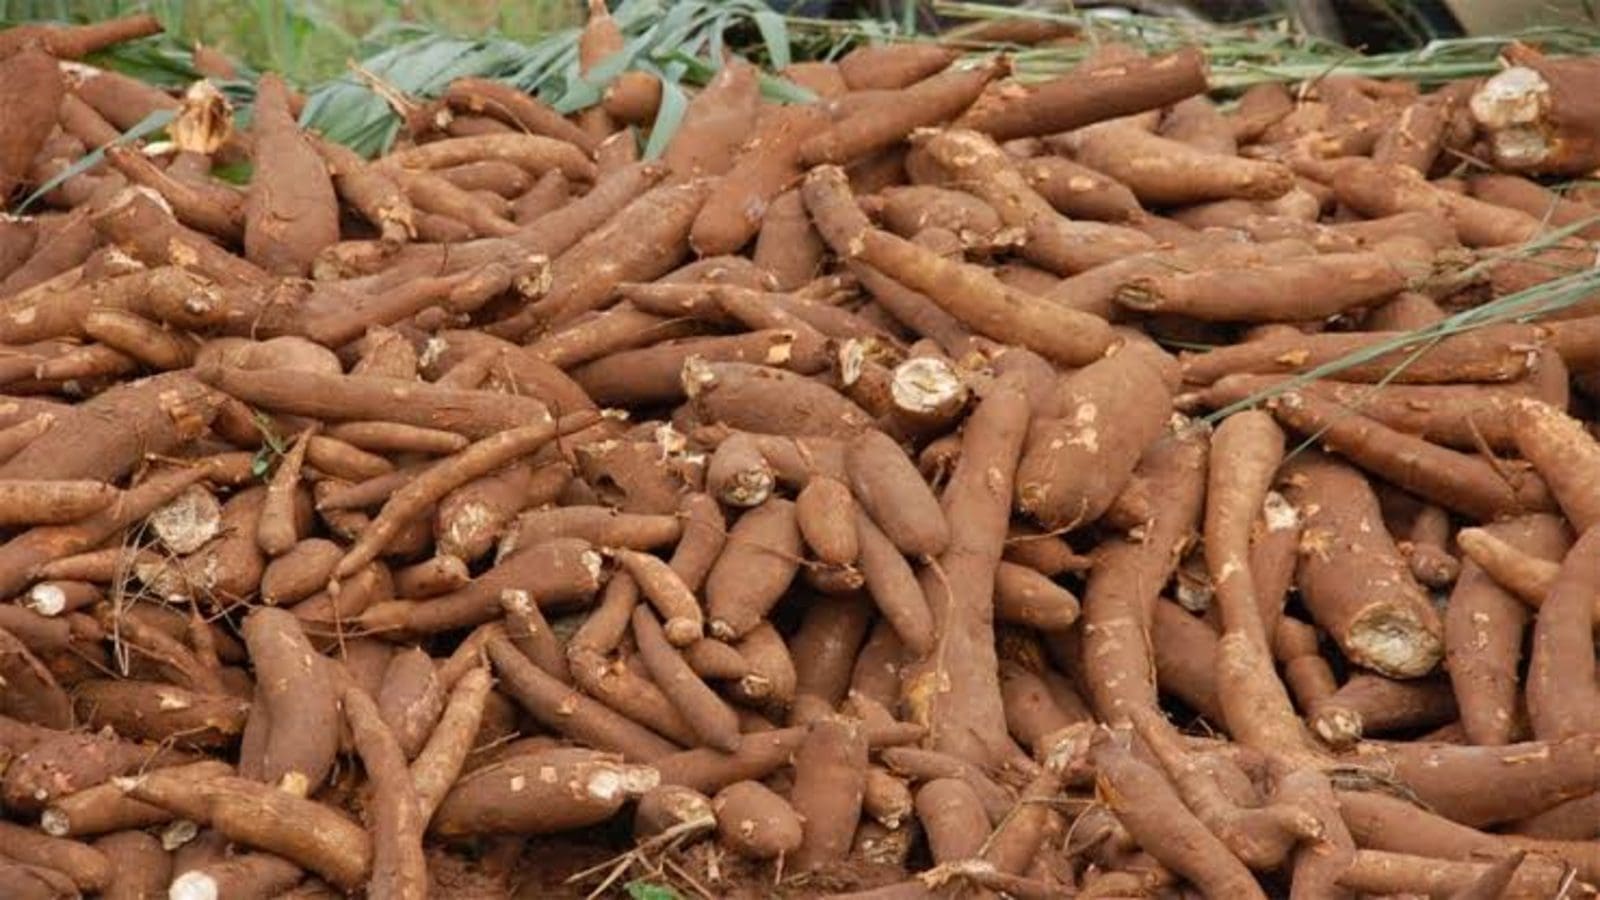 Kenya to host National Cassava Conference and Exhibition 2023 to promote production